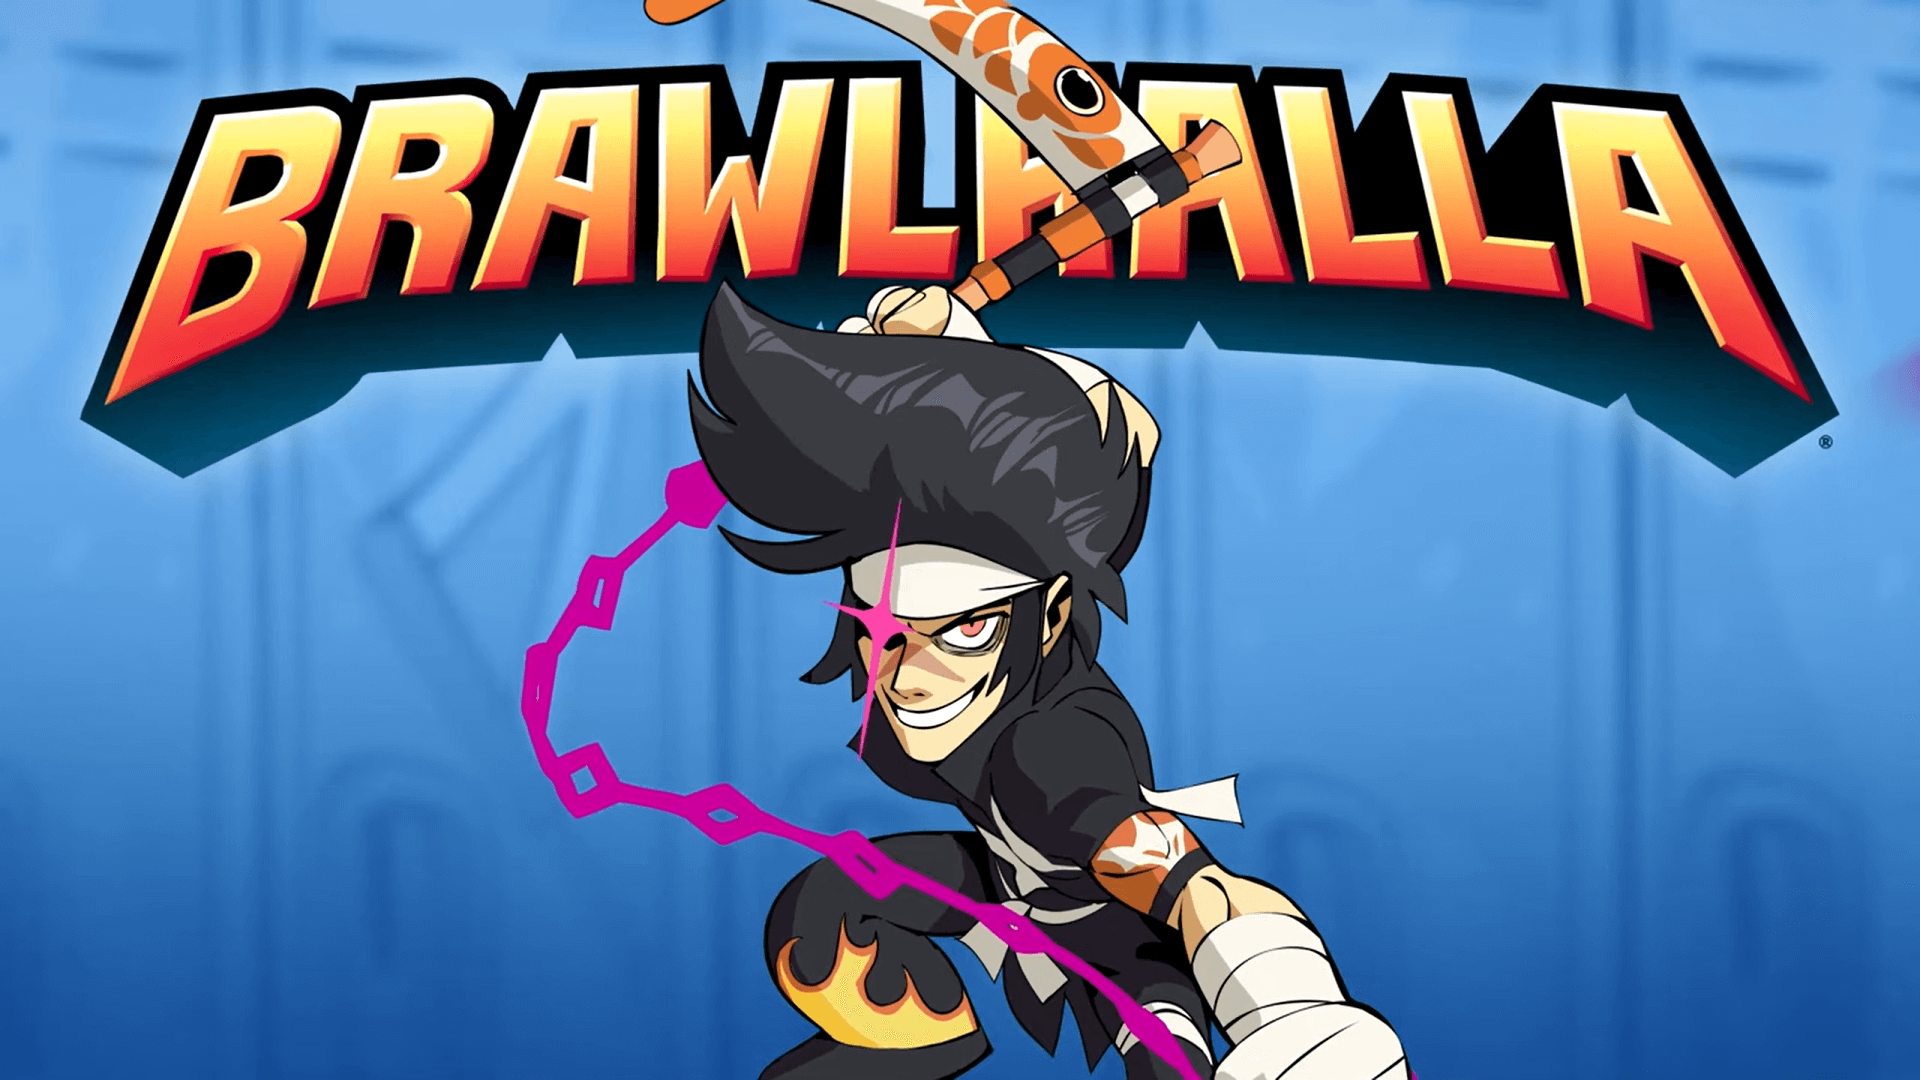 Back to School — a New Event Starts in Brawlhalla